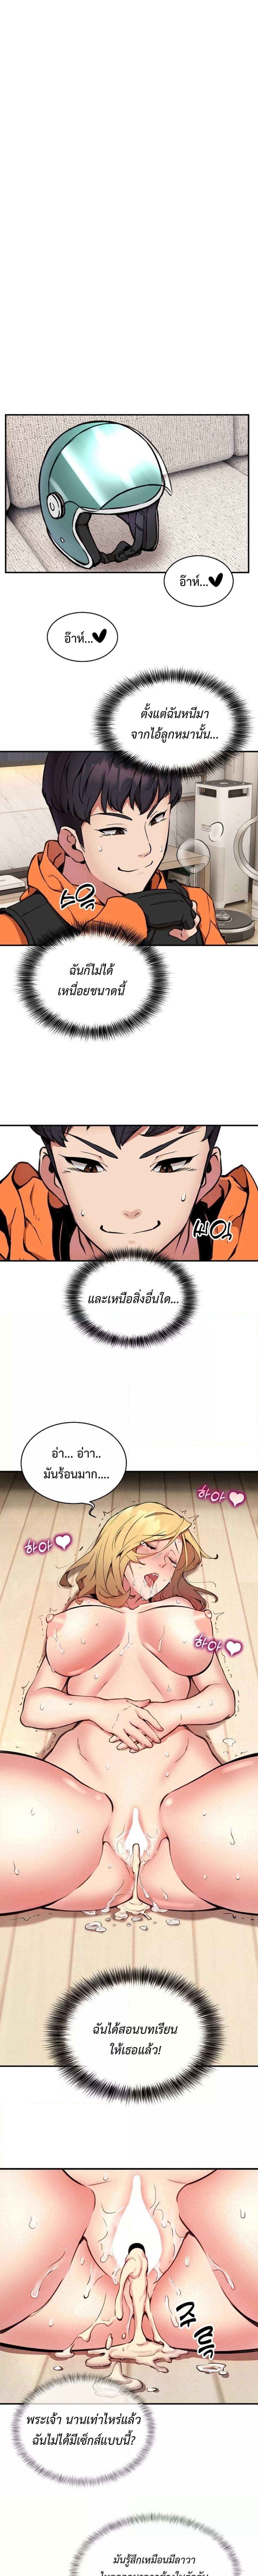 Driver in the New City ตอนที่ 7 ภาพ 0